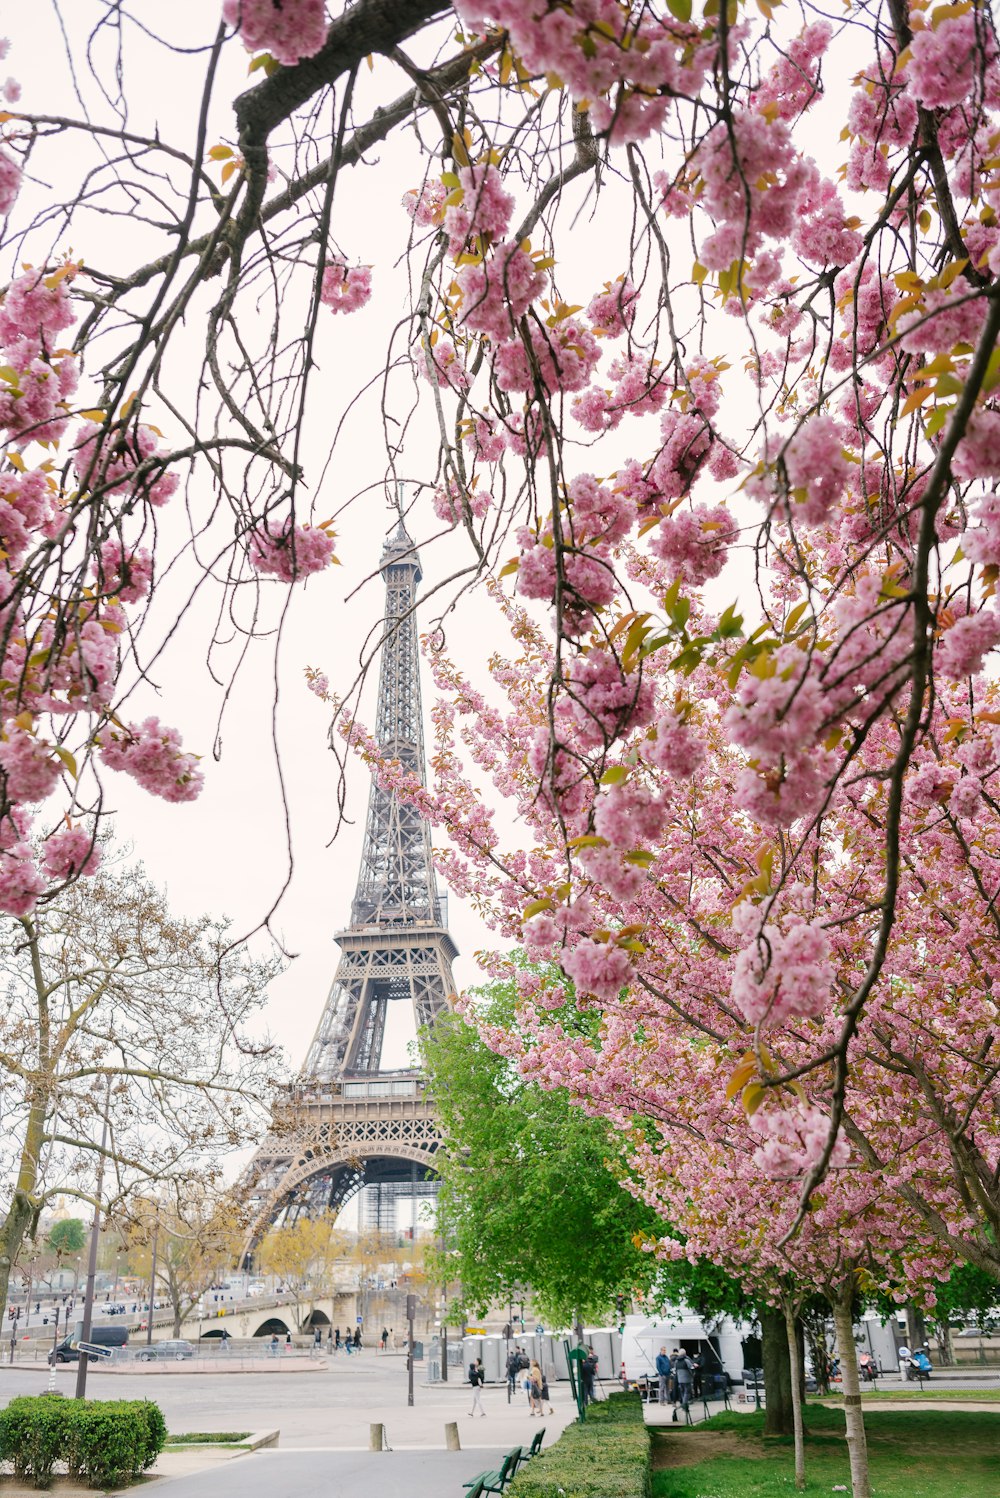 a view of the eiffel tower through the trees